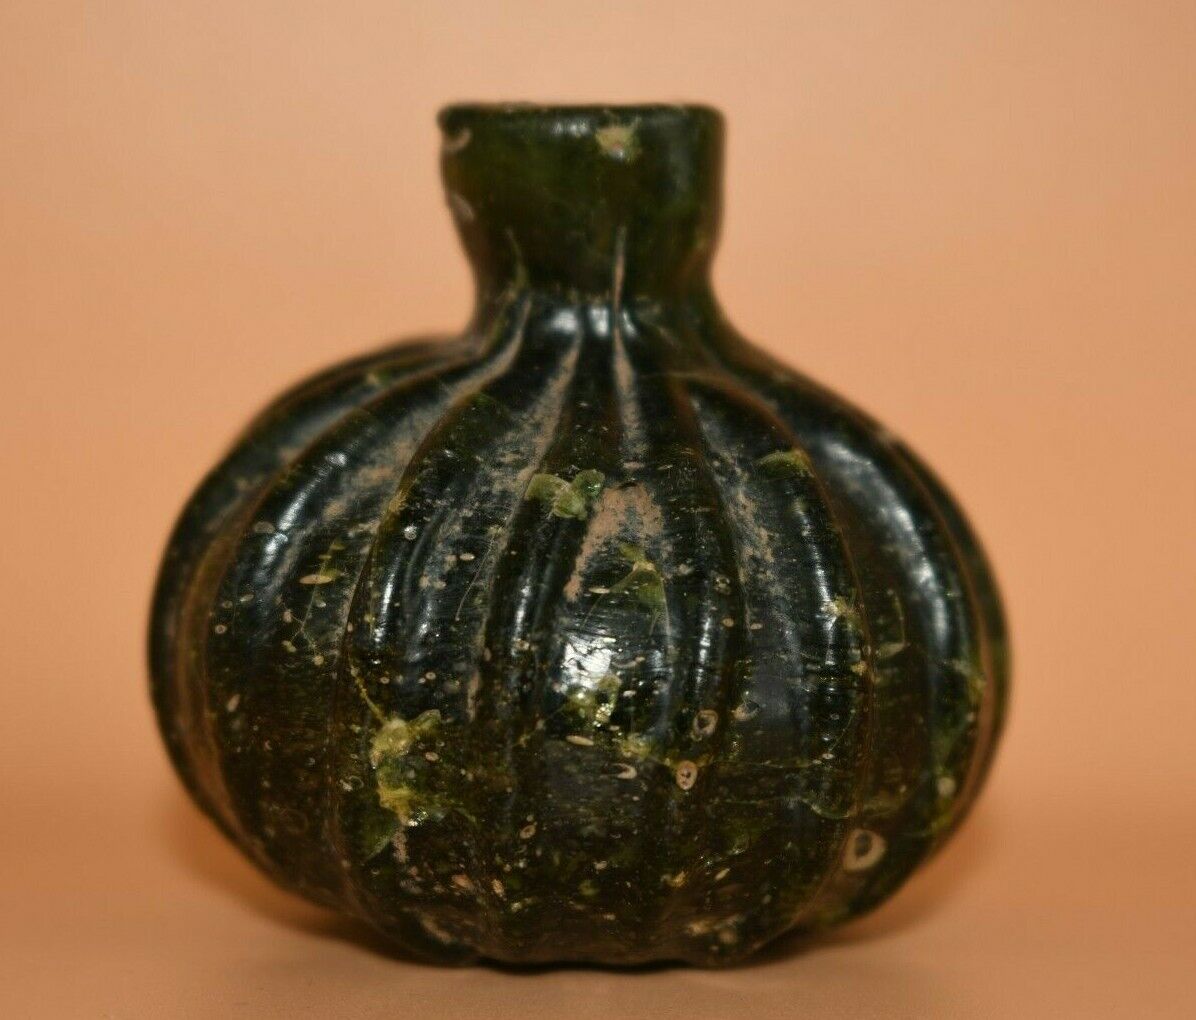 Genuine Intact Ancient Eastern Roman Glass Bottle with Wonderful Color